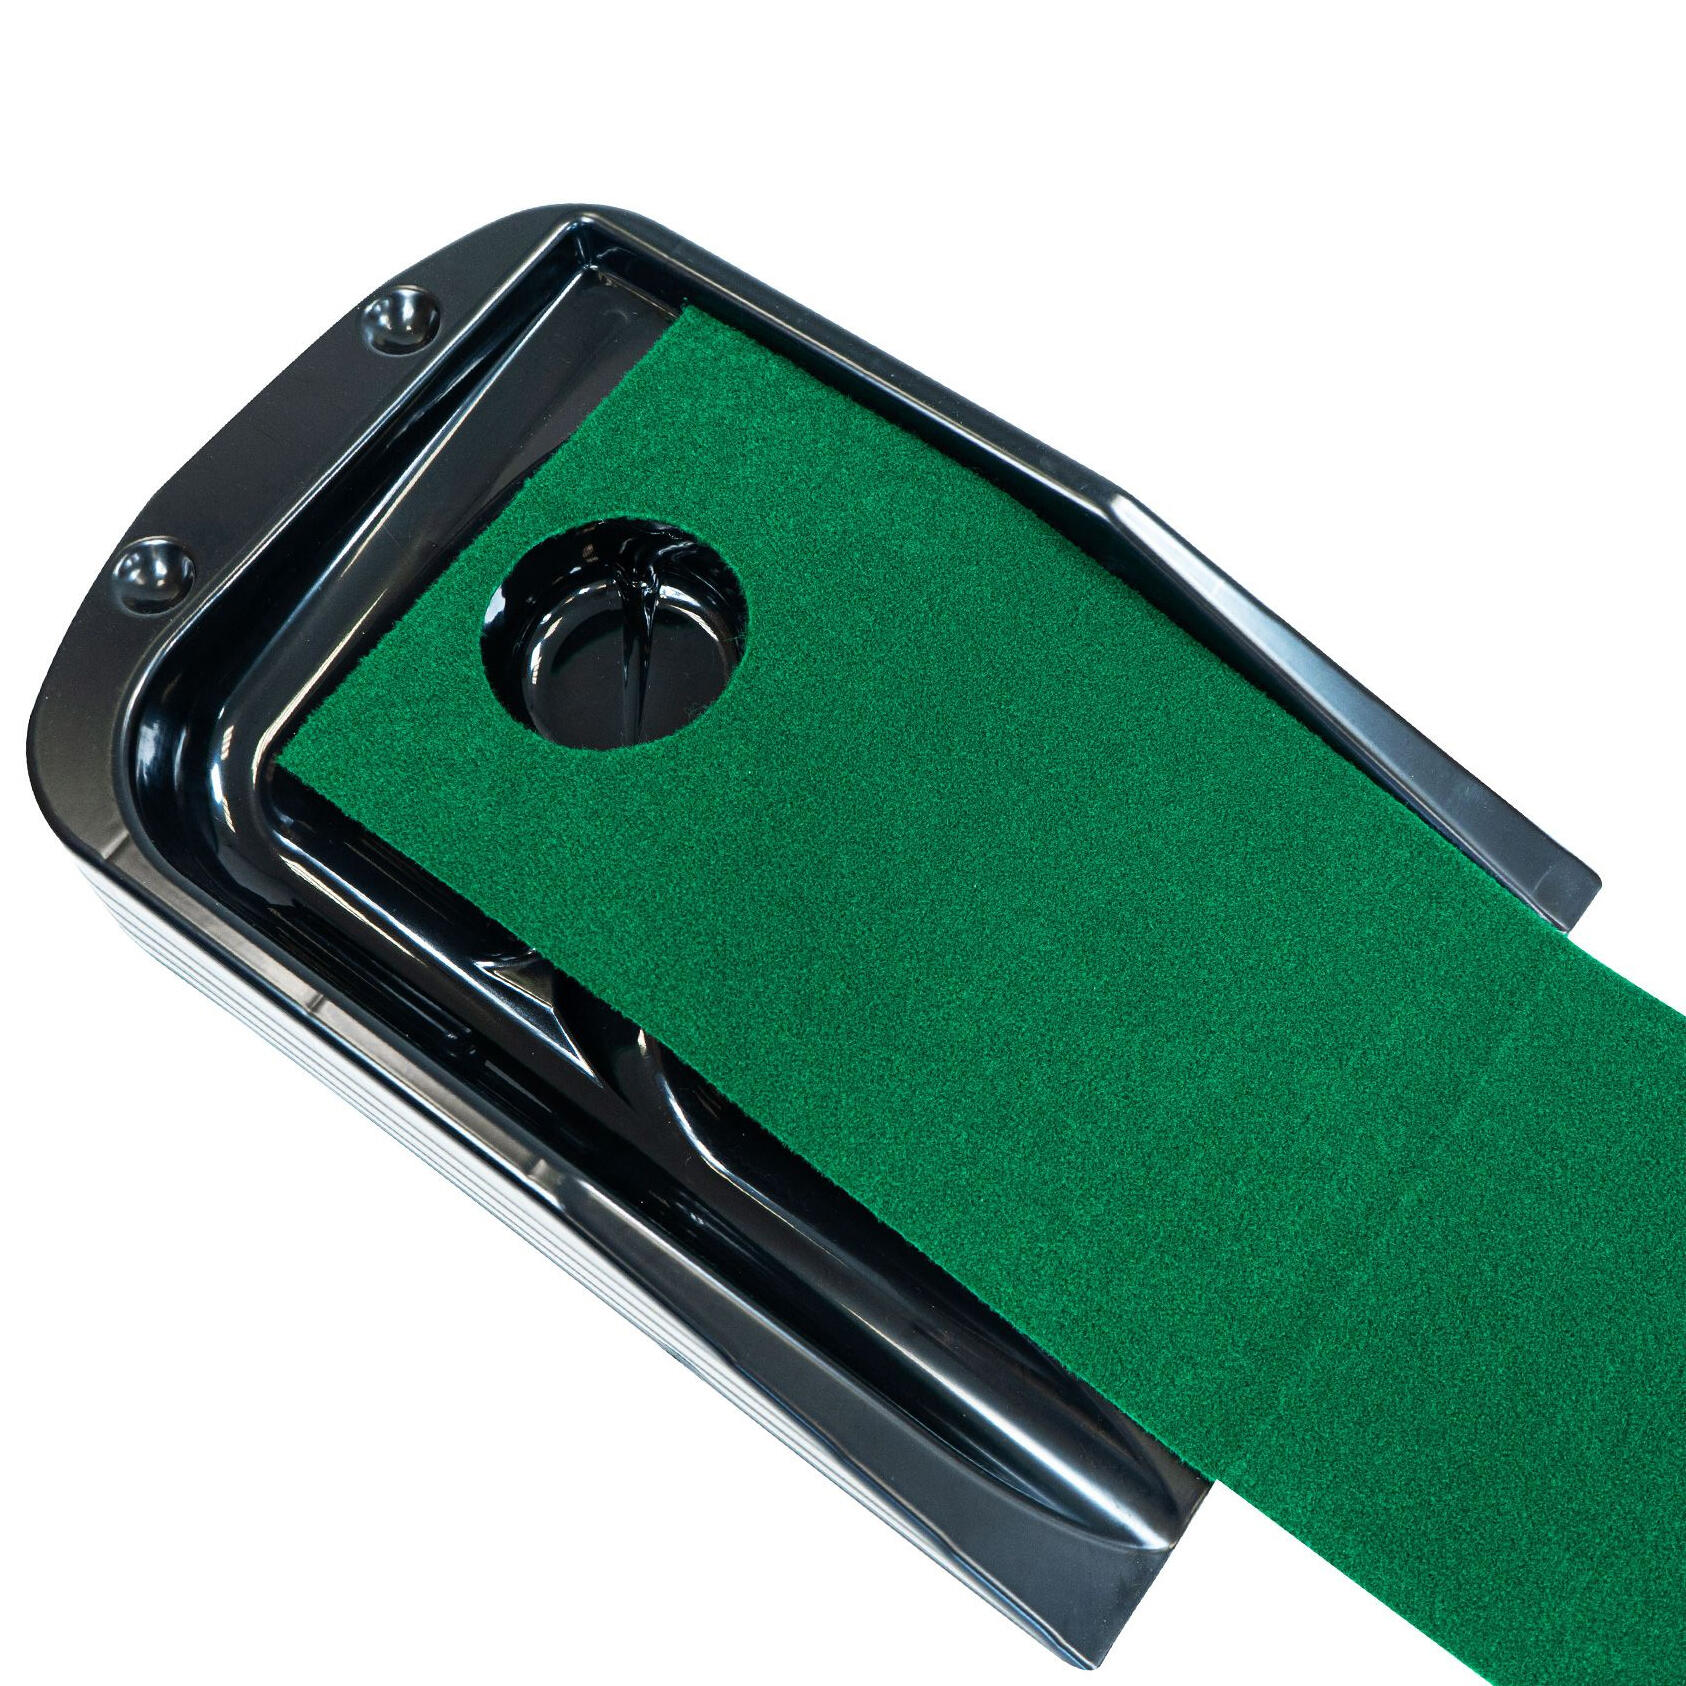 MASTERS GOLF Deluxe Return Putting Mat